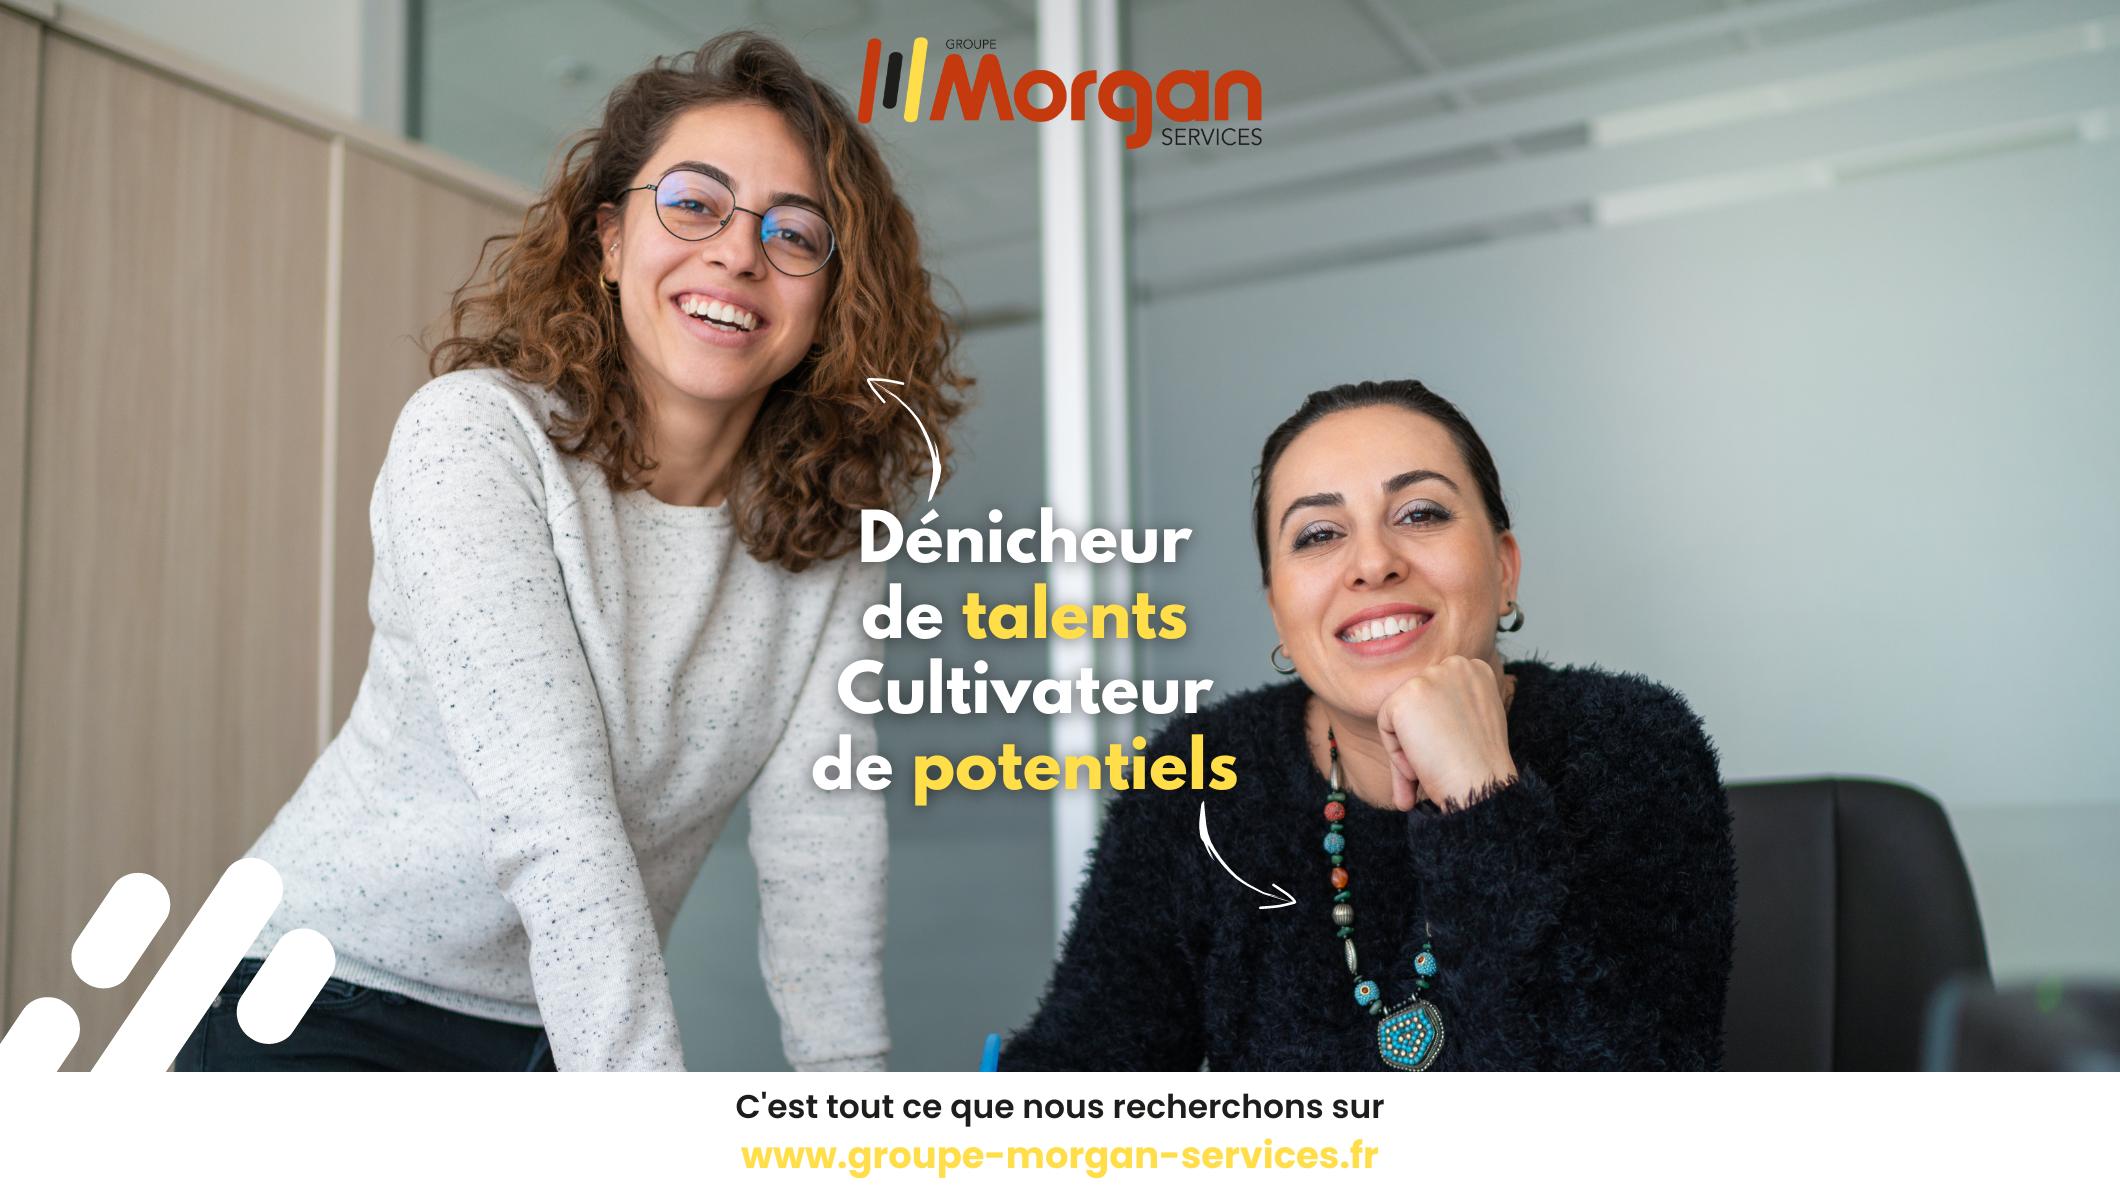 Groupe Morgan Services Les Herbiers Les Herbiers